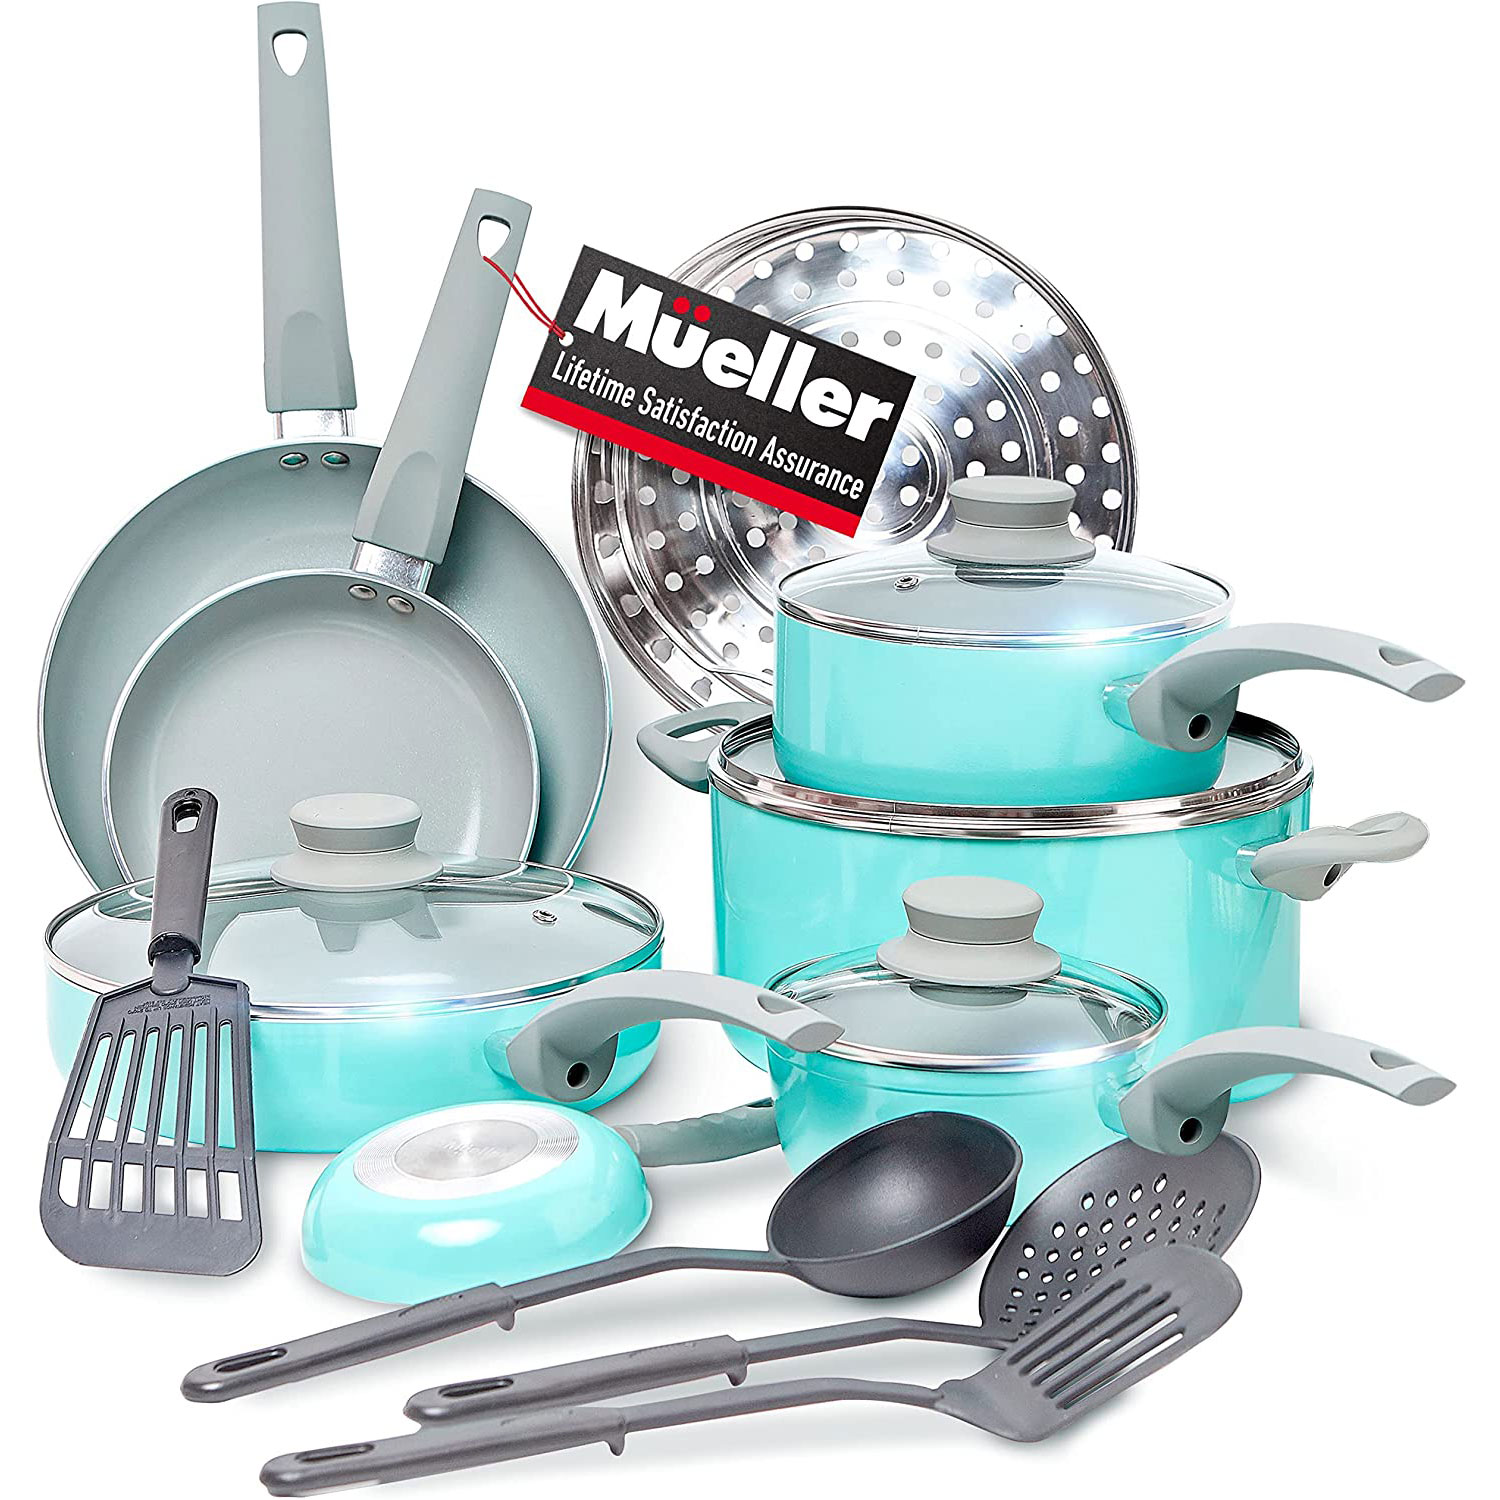 muellerhome_Healthy-Stone-16-Piece-Cookware-Set-Turquoise-8